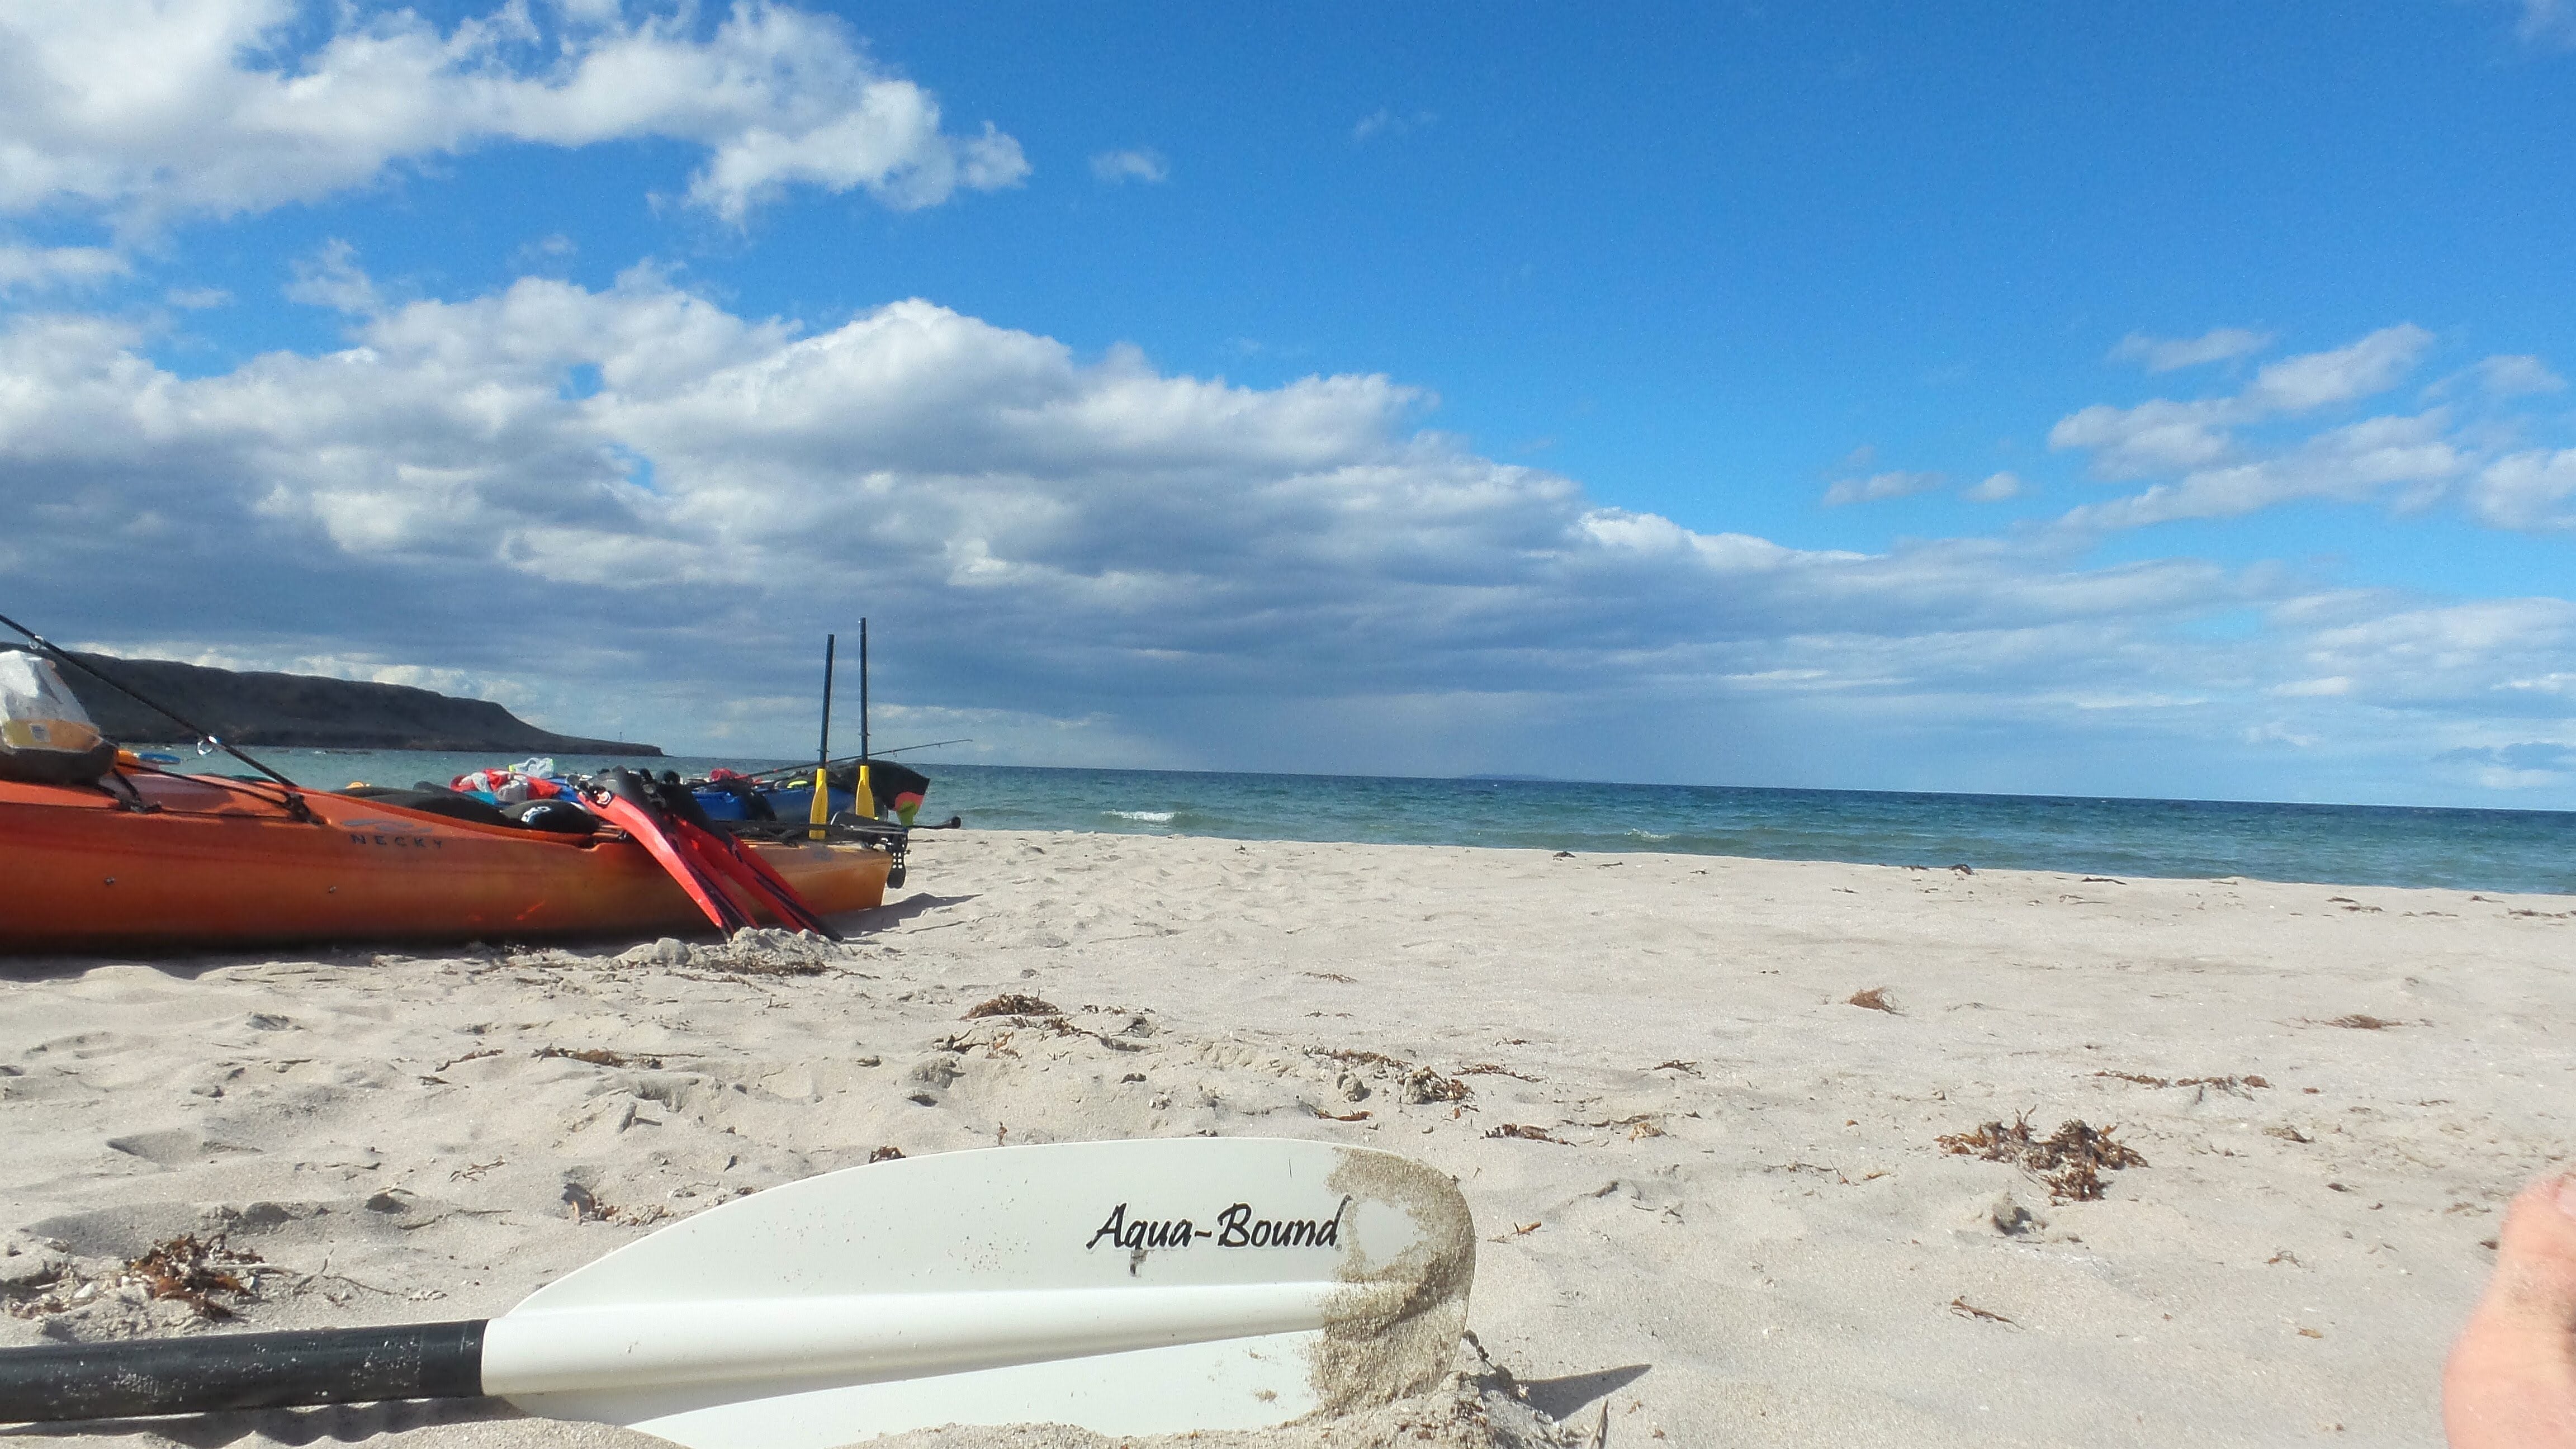 Kayak Touring the Sea of Cortez and Whiskey Paddle Review